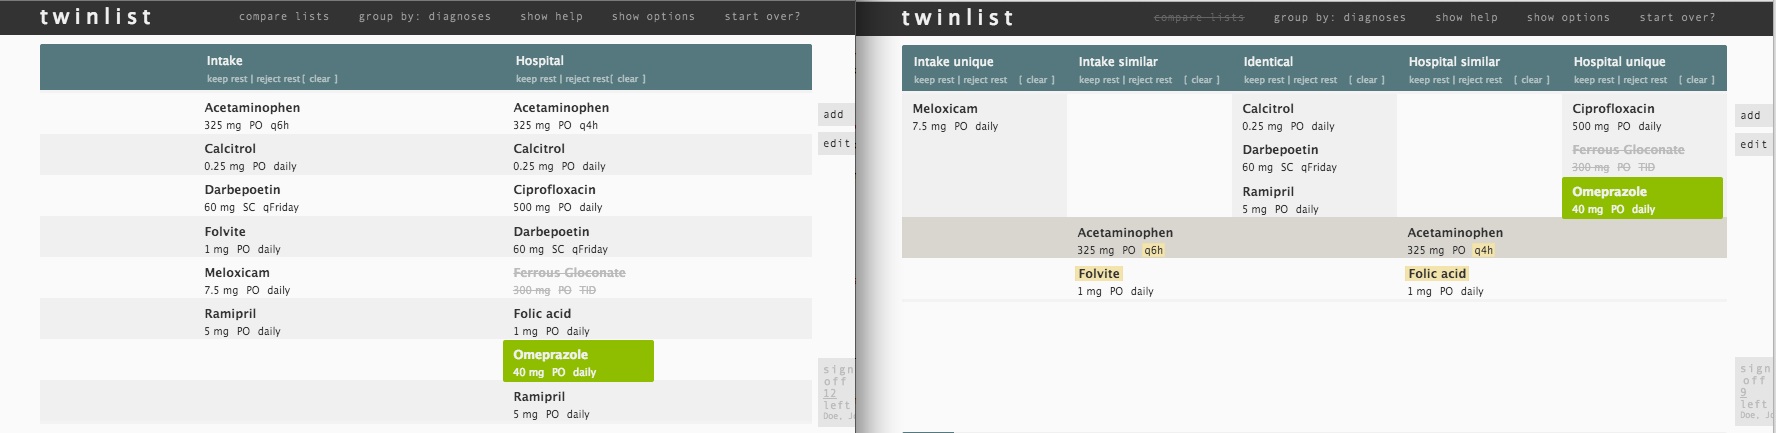 Compare lists. Blacklist Twins текст.